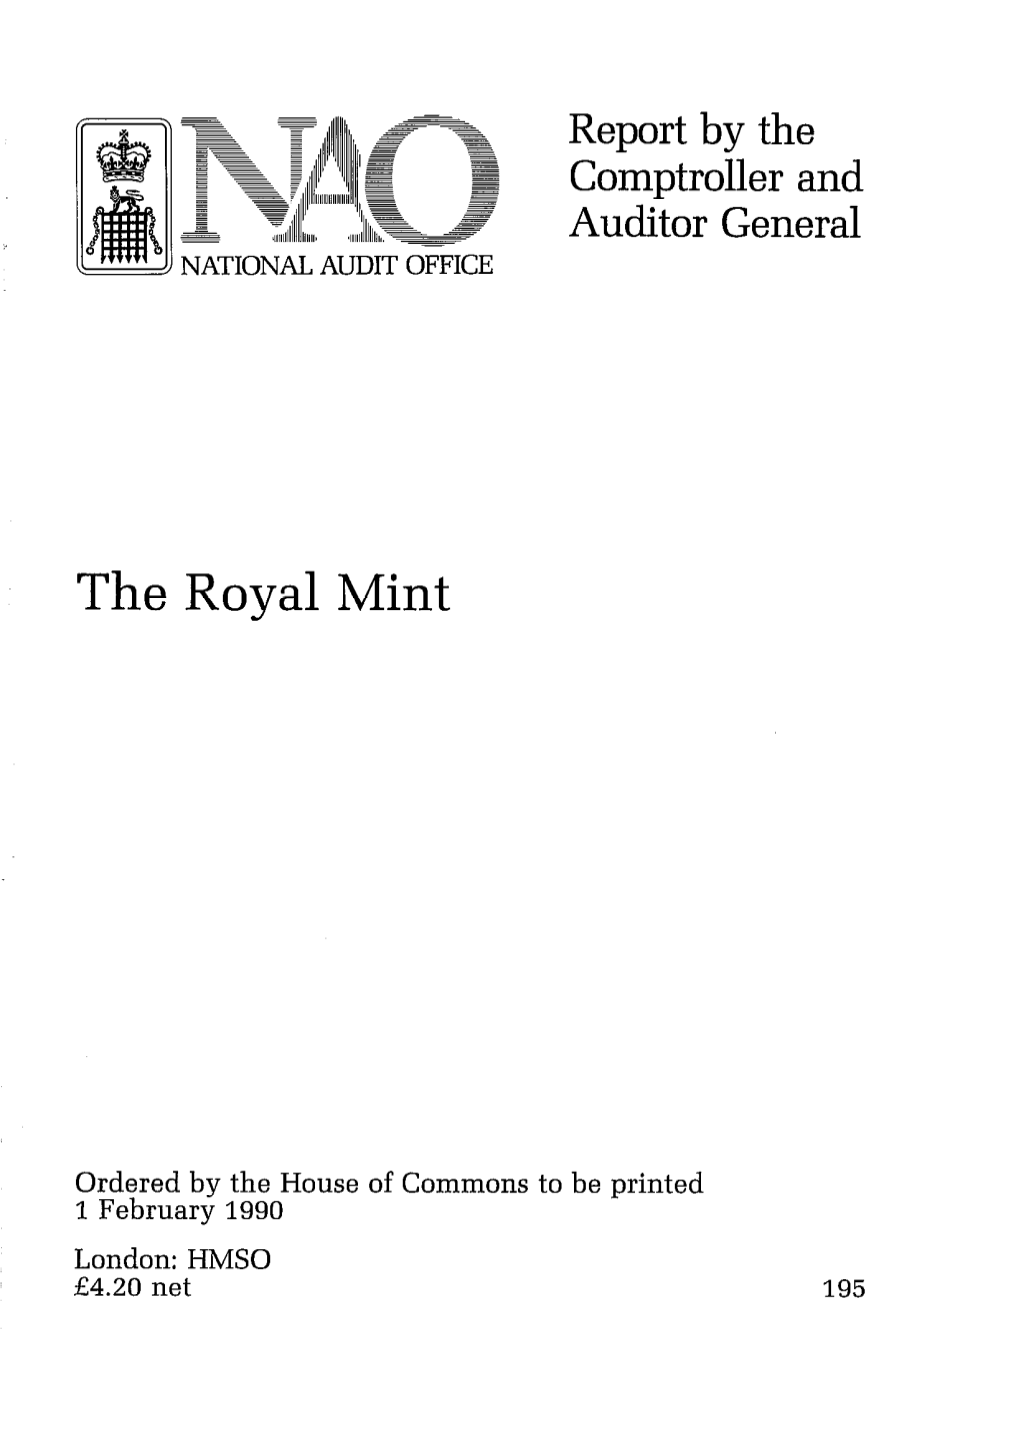 NAO Report (HC 195 1989/90): the Royal Mint